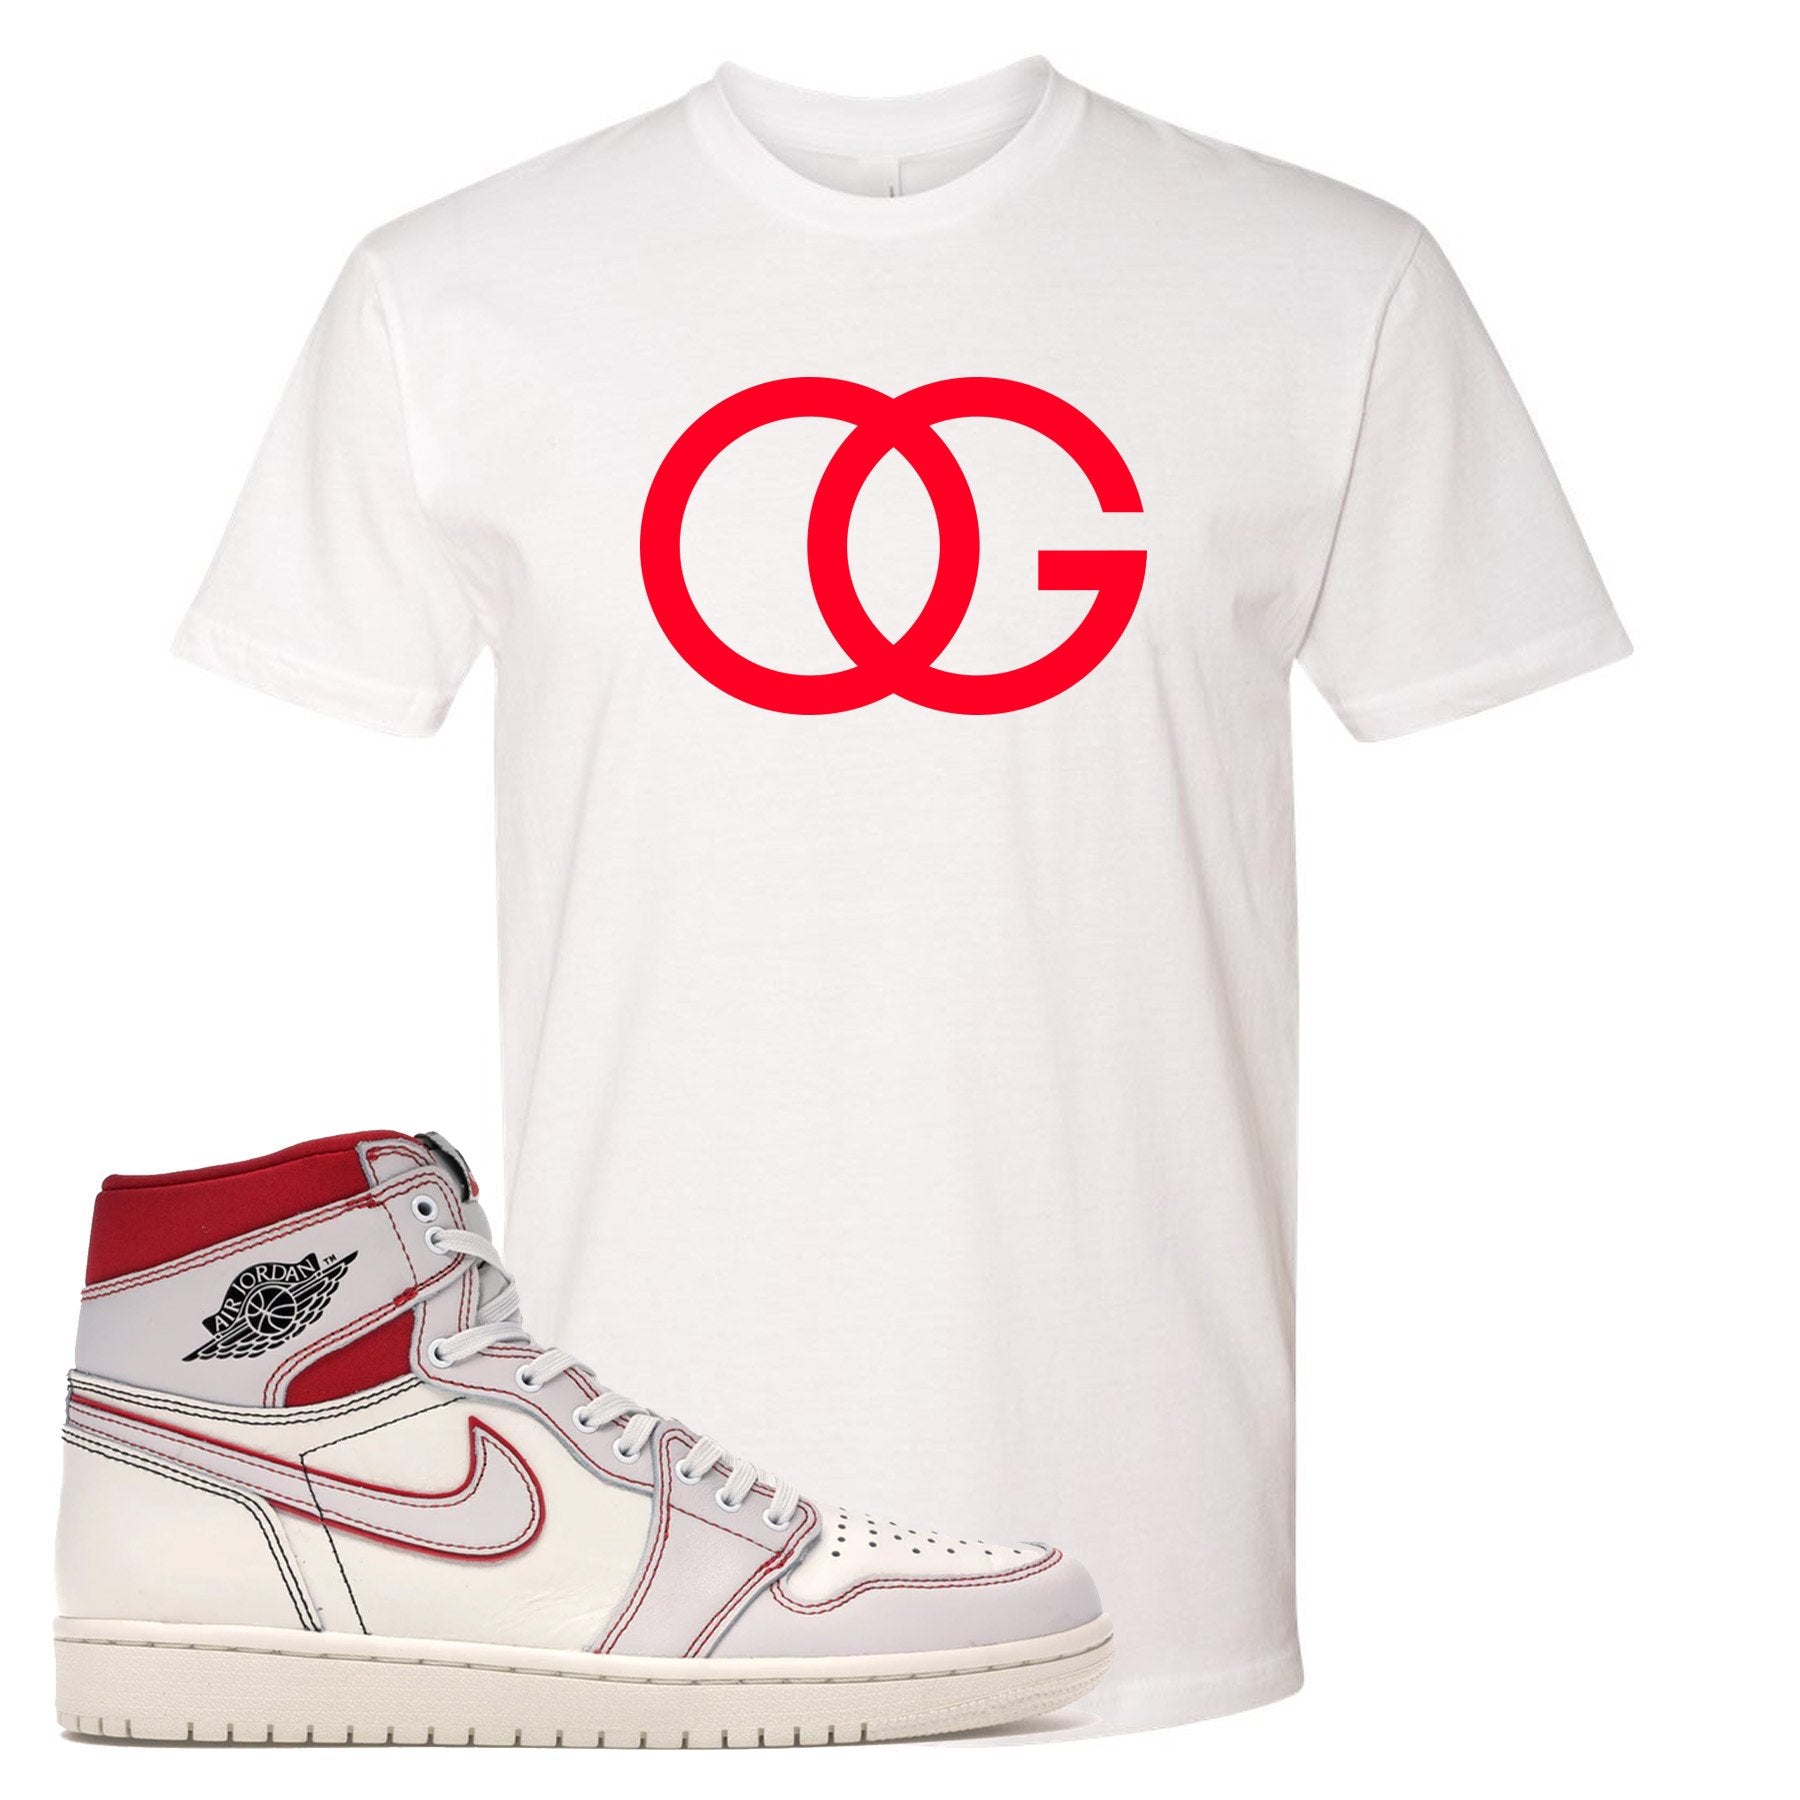 White and red t-shirt to match the white and red High Retro Jordan 1 shoes